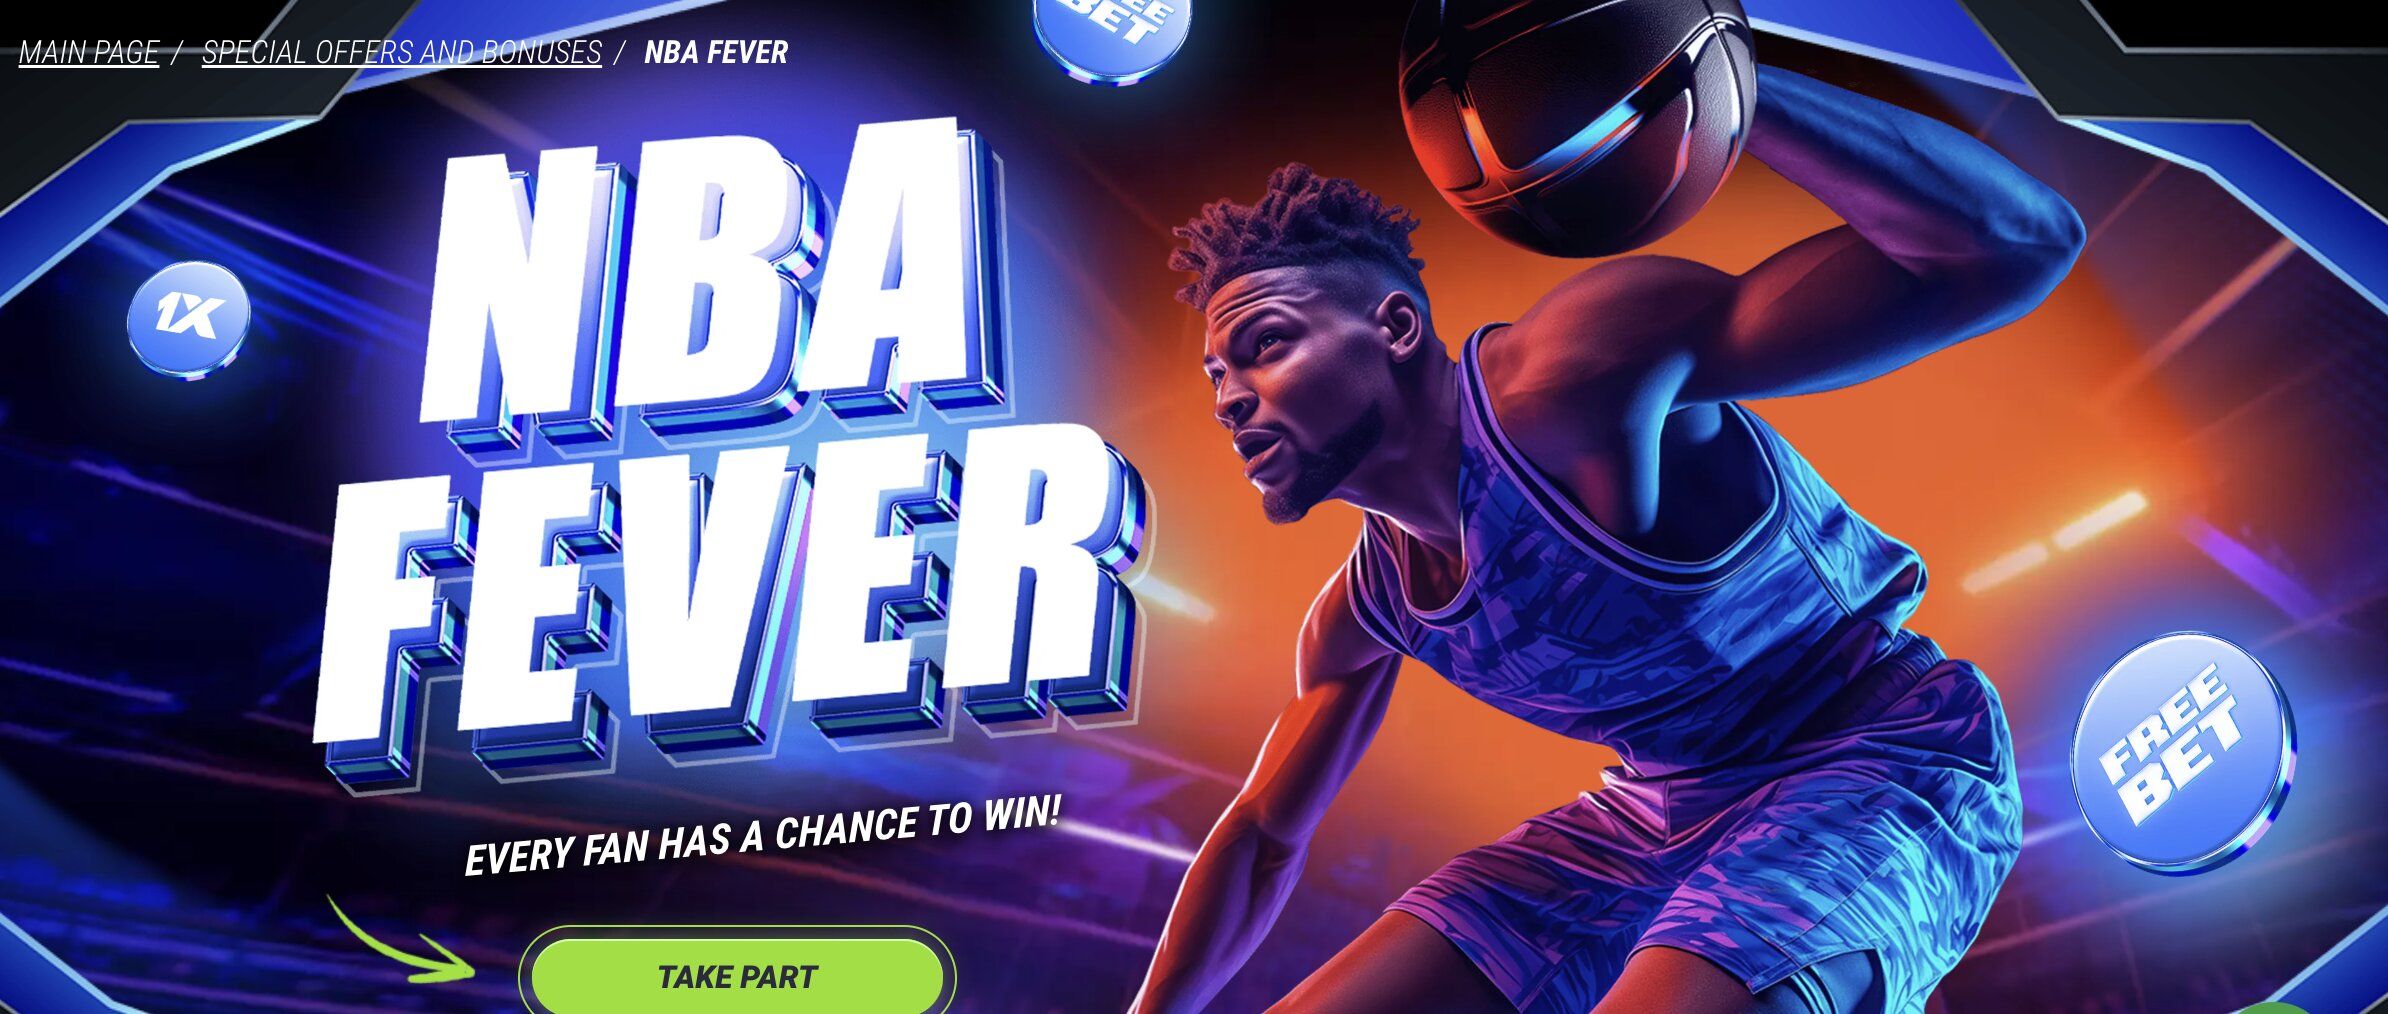 1xBet NBA Fever Promotion: Bet 3 USD & Win Top Prize!